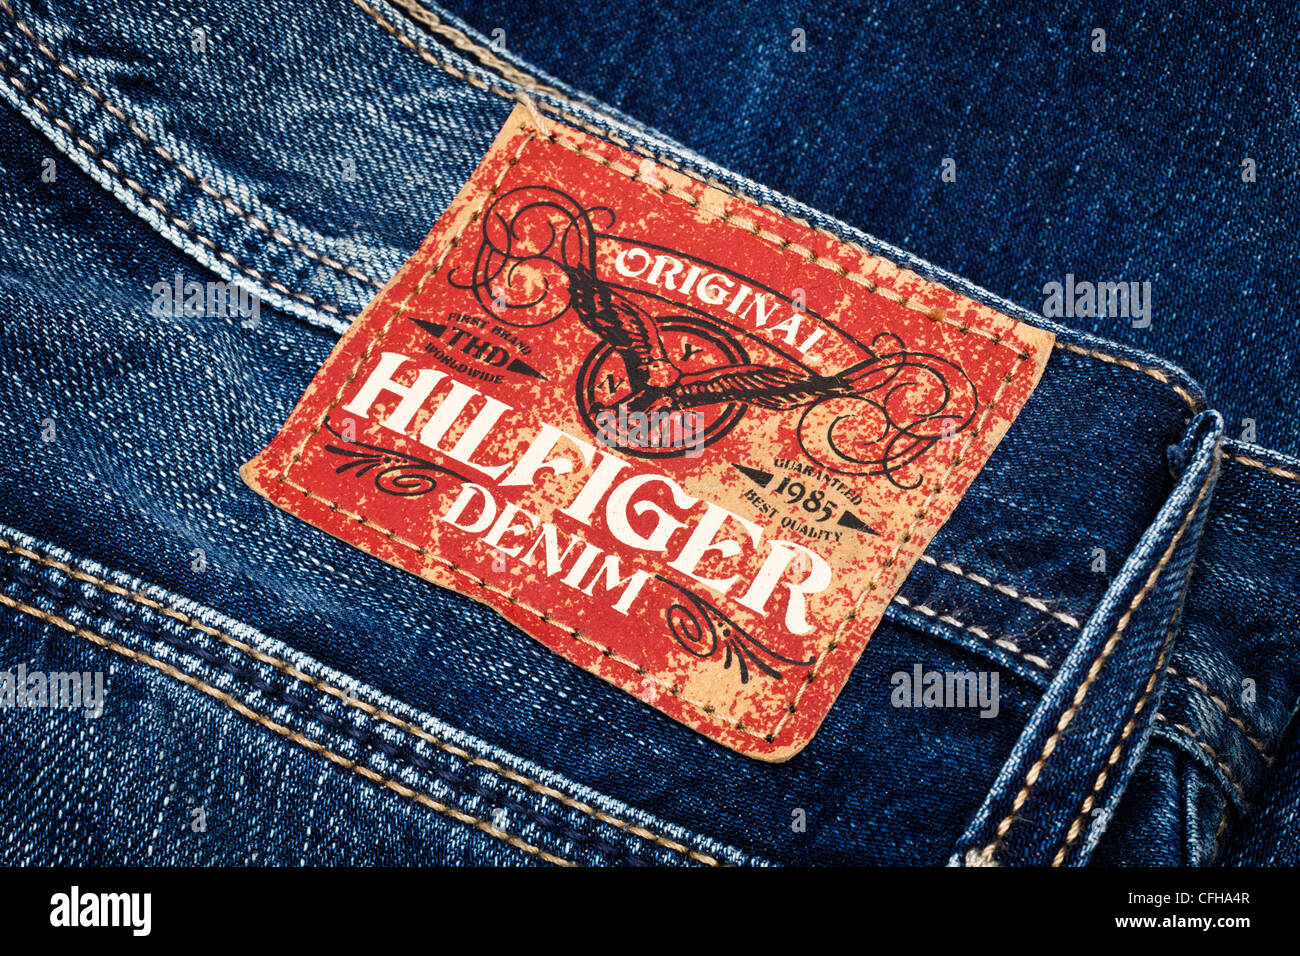 Tommy Hilfiger clothing brand logo on pair of mens denim jeans Stock Photo